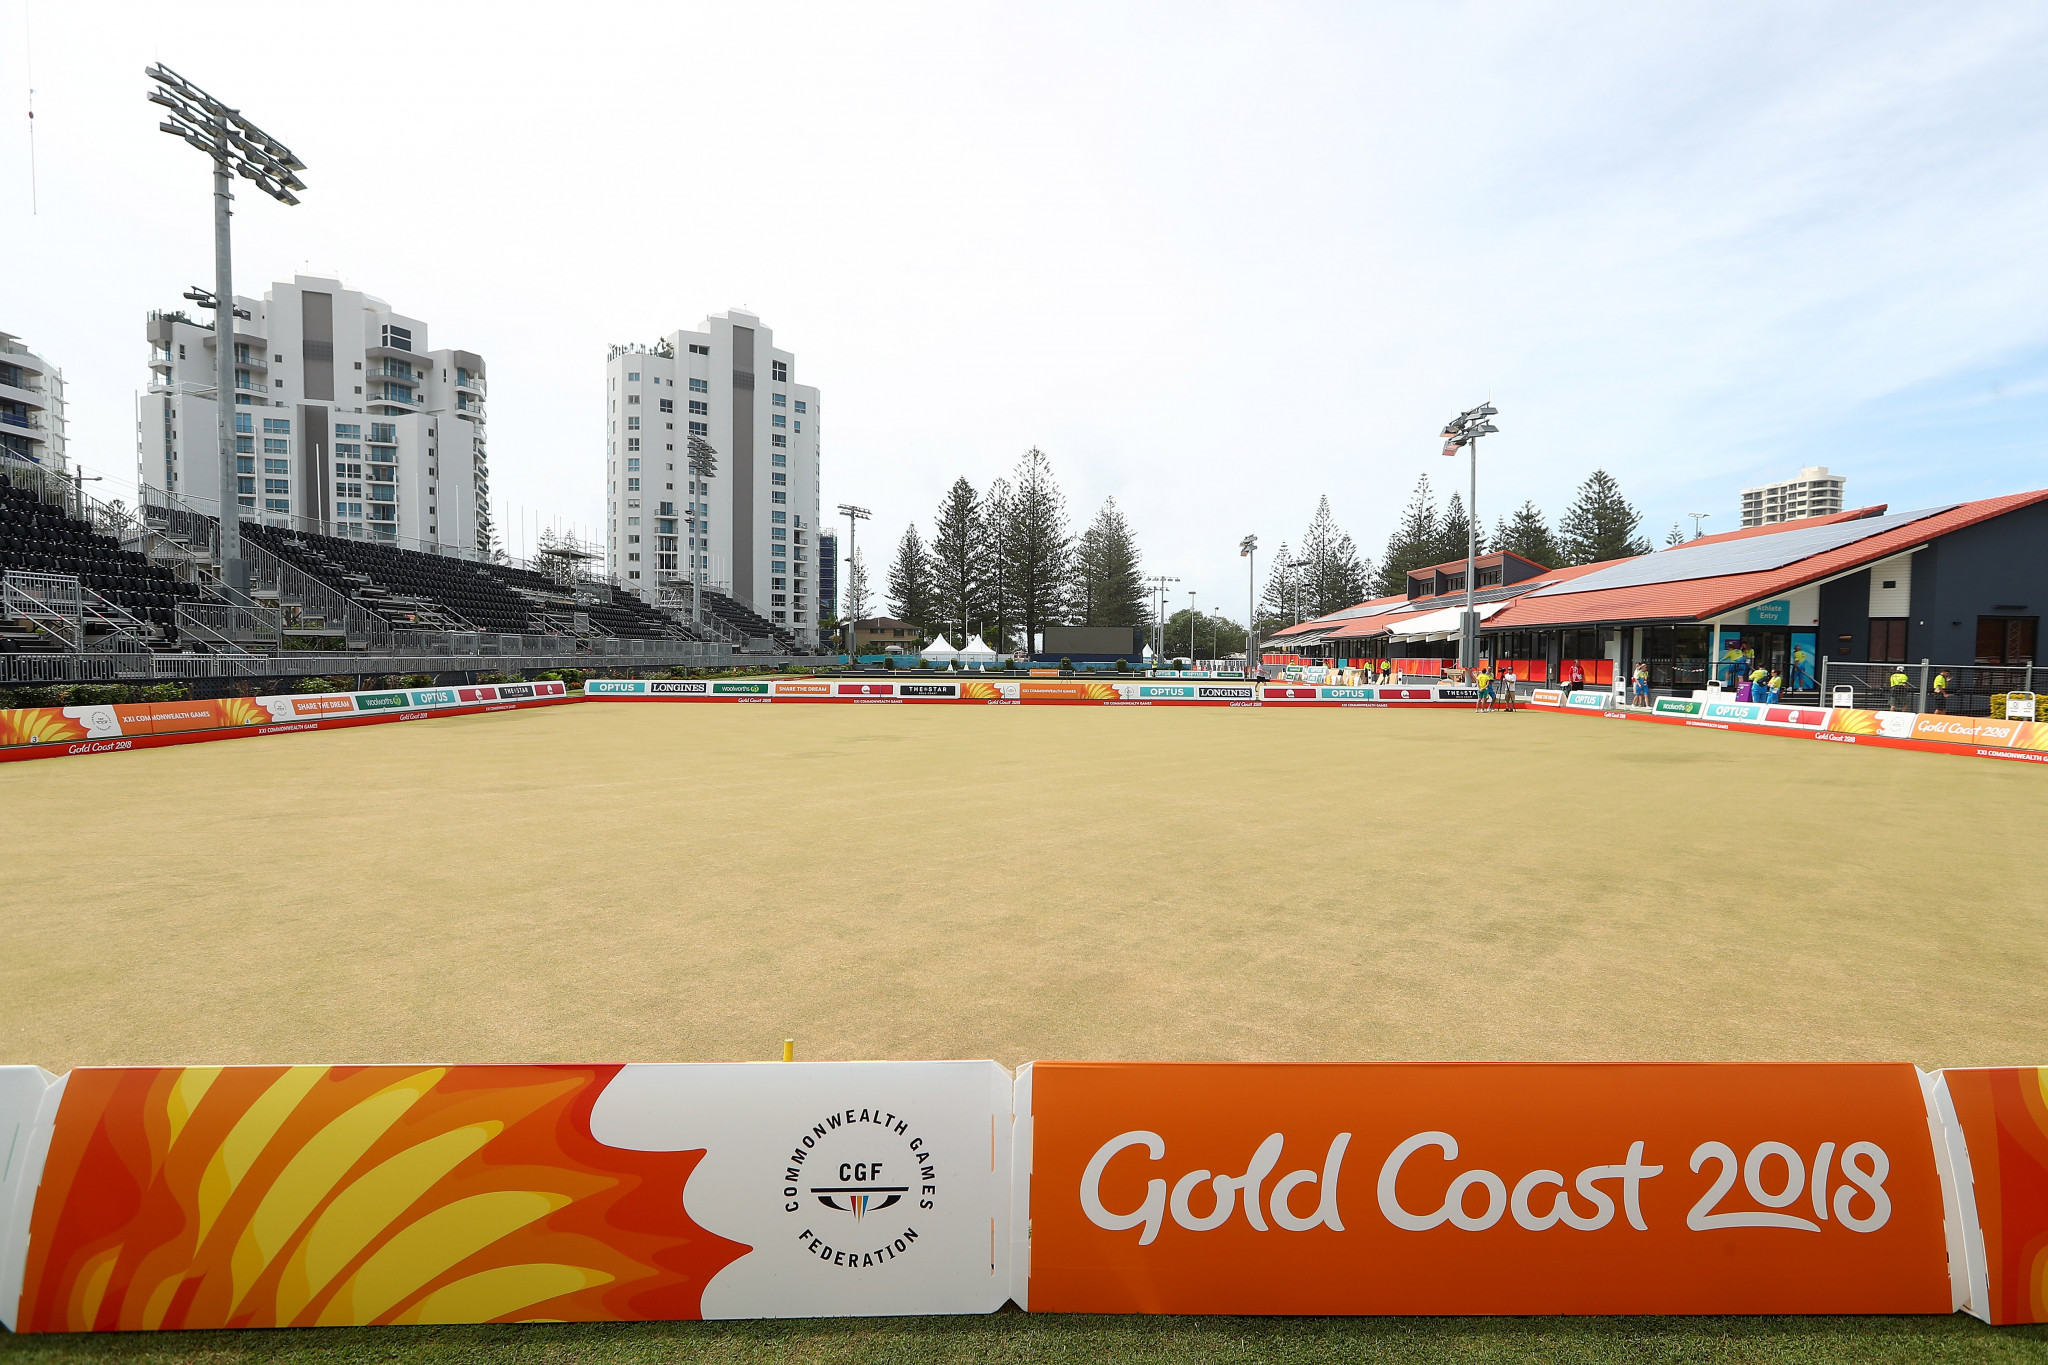 Gold Coast 2018 have pledged to put on an entertaining show for spectators watching lawn bowls events at the Commonwealth Games ©Getty Images